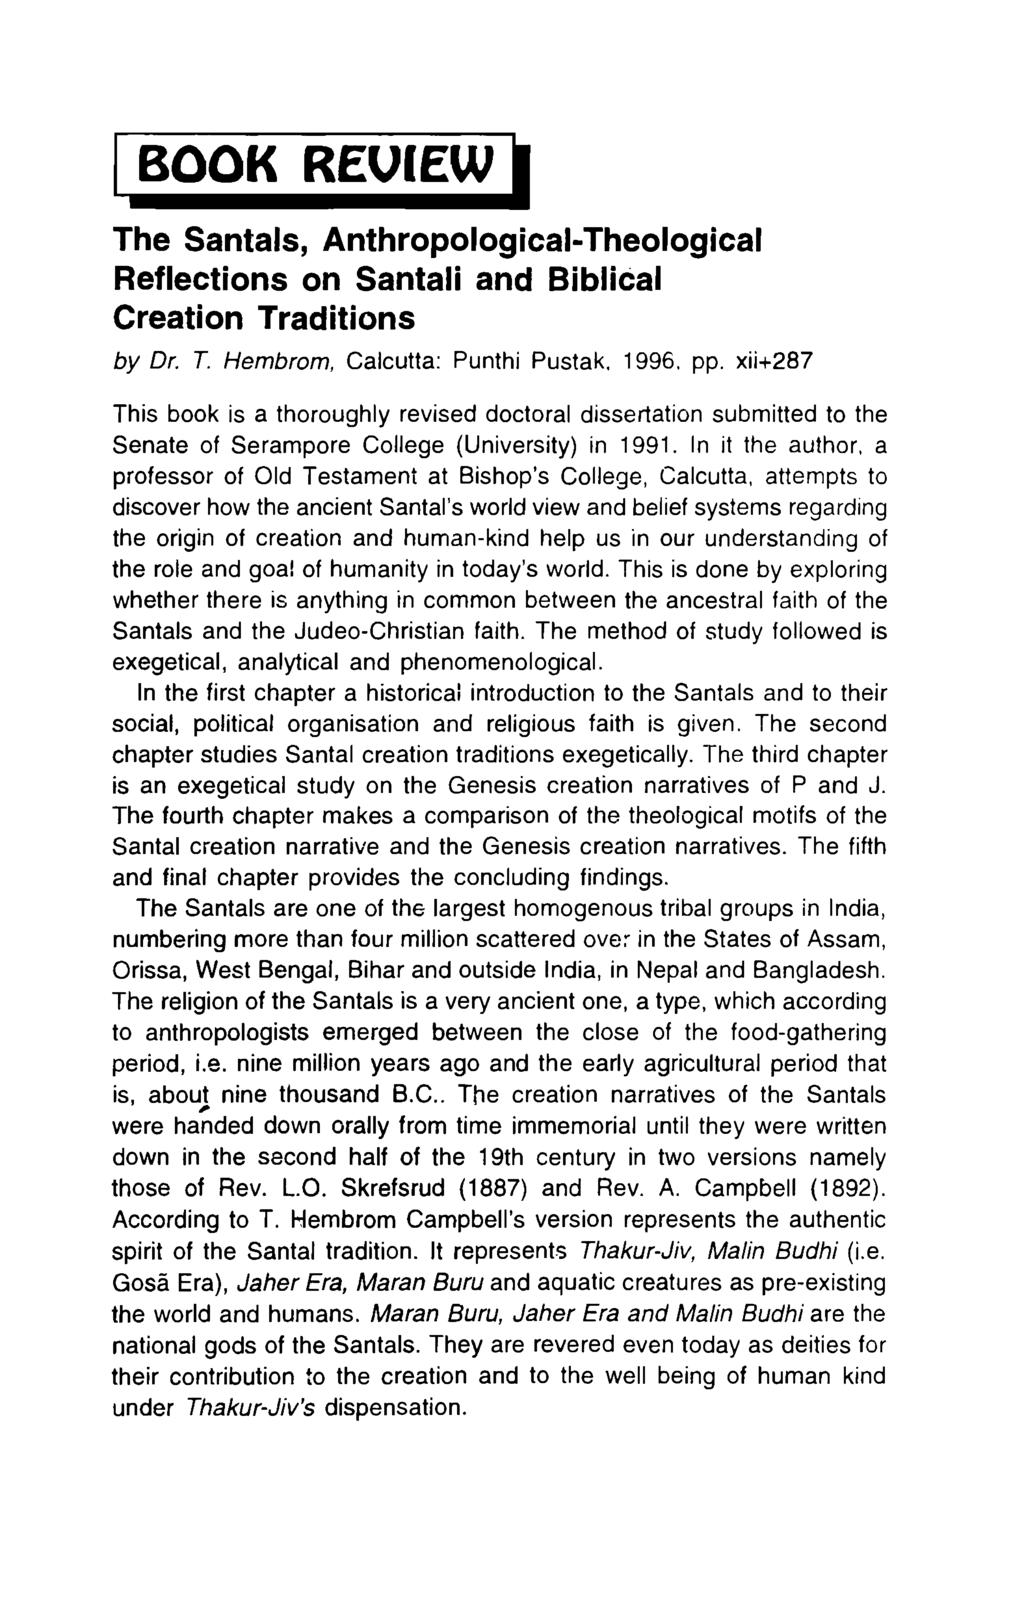 I BOOK REUIEW I The Santals, Anthropological-Theological Reflections on Santali and Biblical Creation Traditions by Dr. T. Hembrom, Calcutta: Punthi Pustak. 1996. pp.